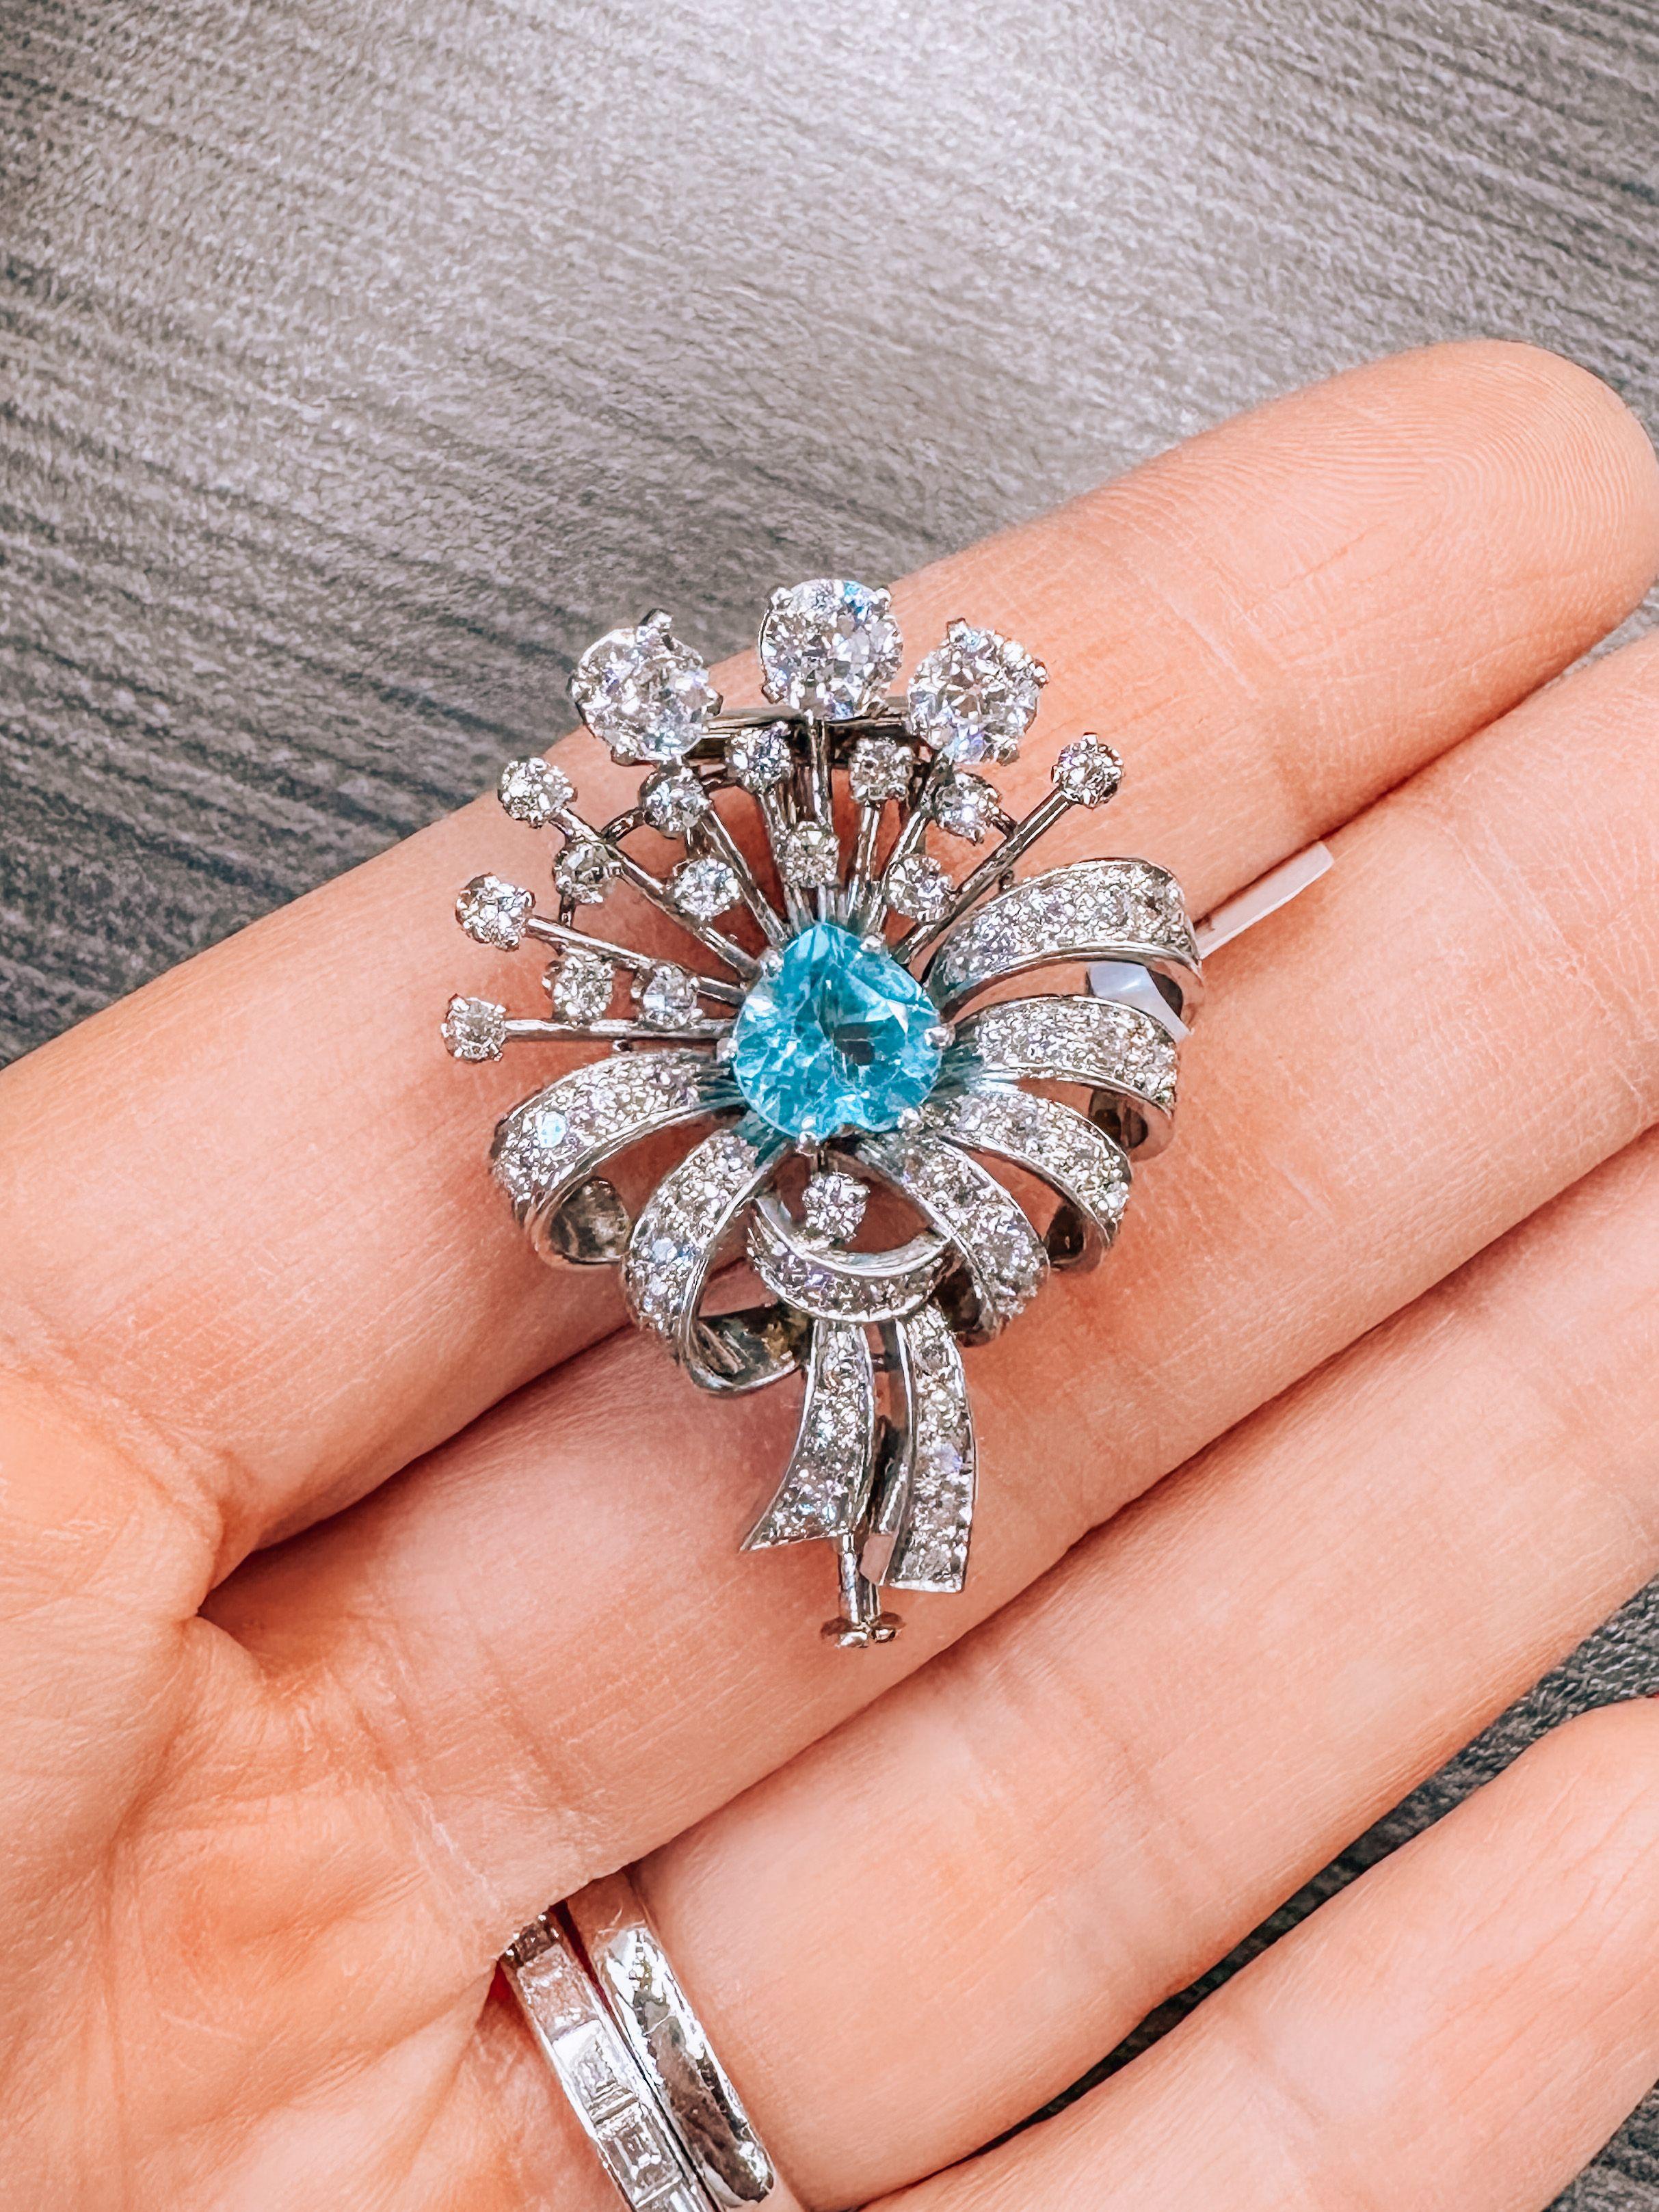 Just about 1 inch in length this brooch is a lovely jewel from the Art Deco era. Encrusted with old cut diamonds and mounted with a light aquamarine in the center you will love this beauty and will wear it for every occasion. 
We love that it is